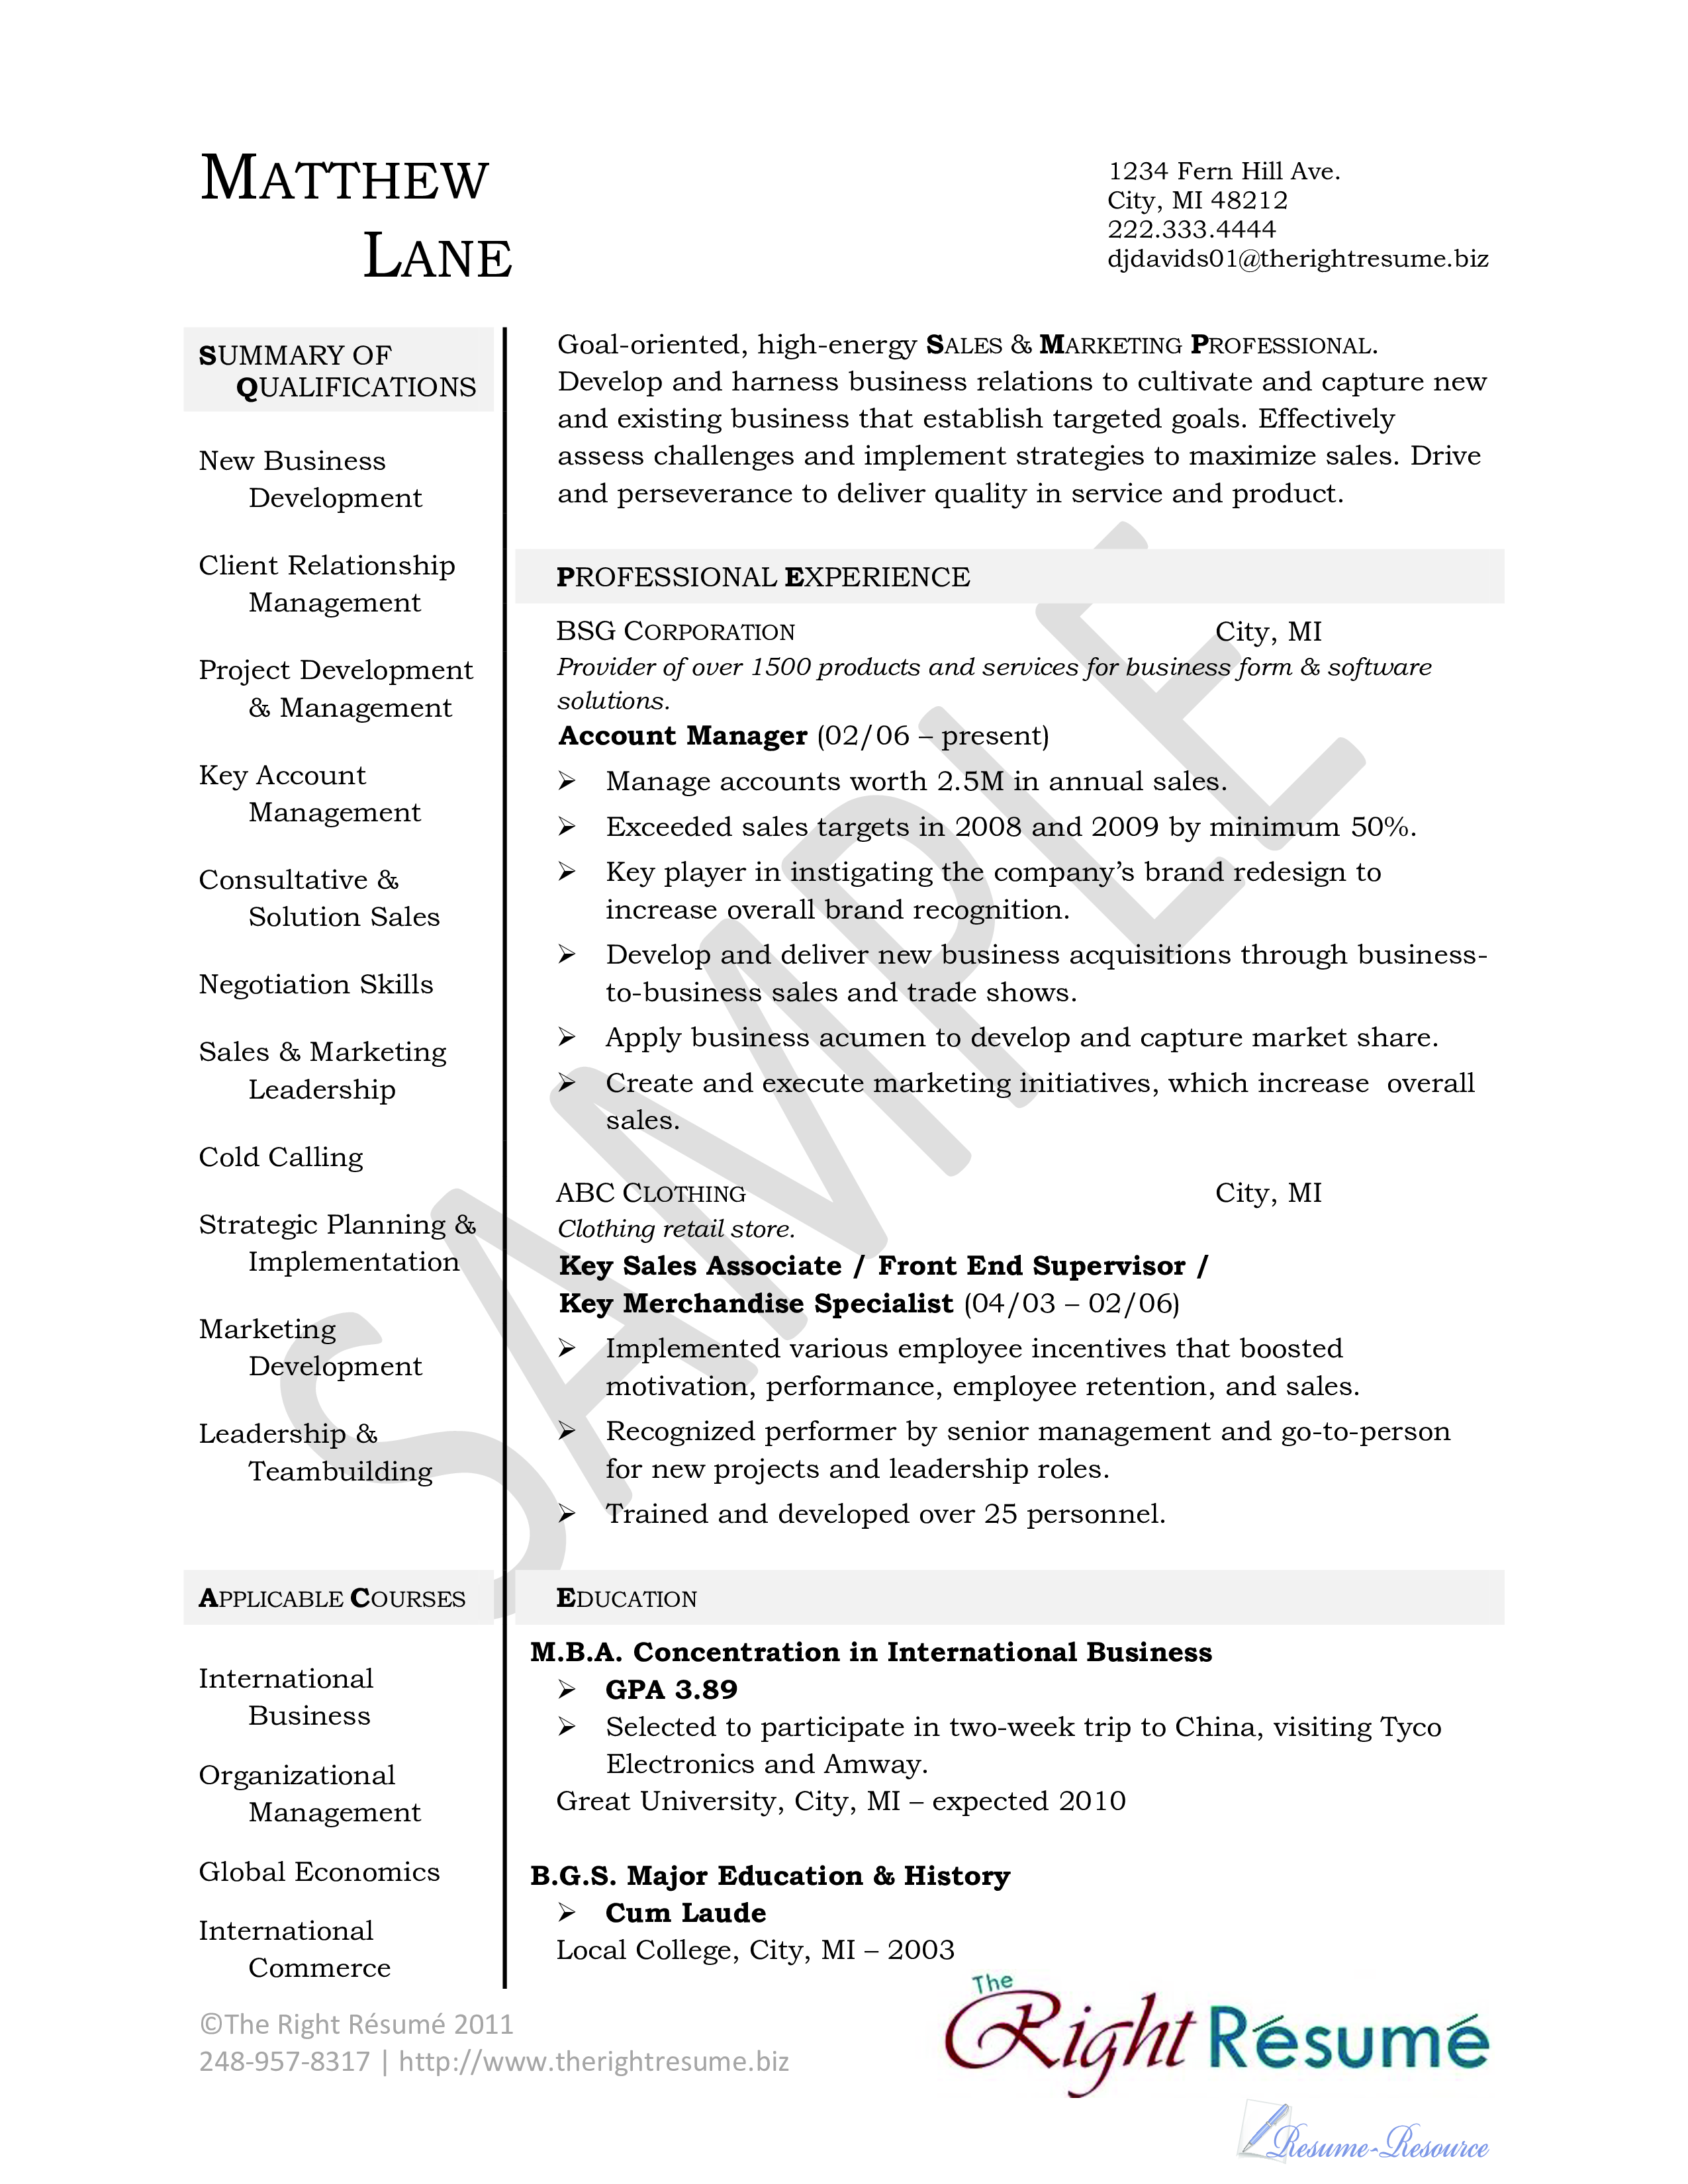 Account Manager Resume sample main image